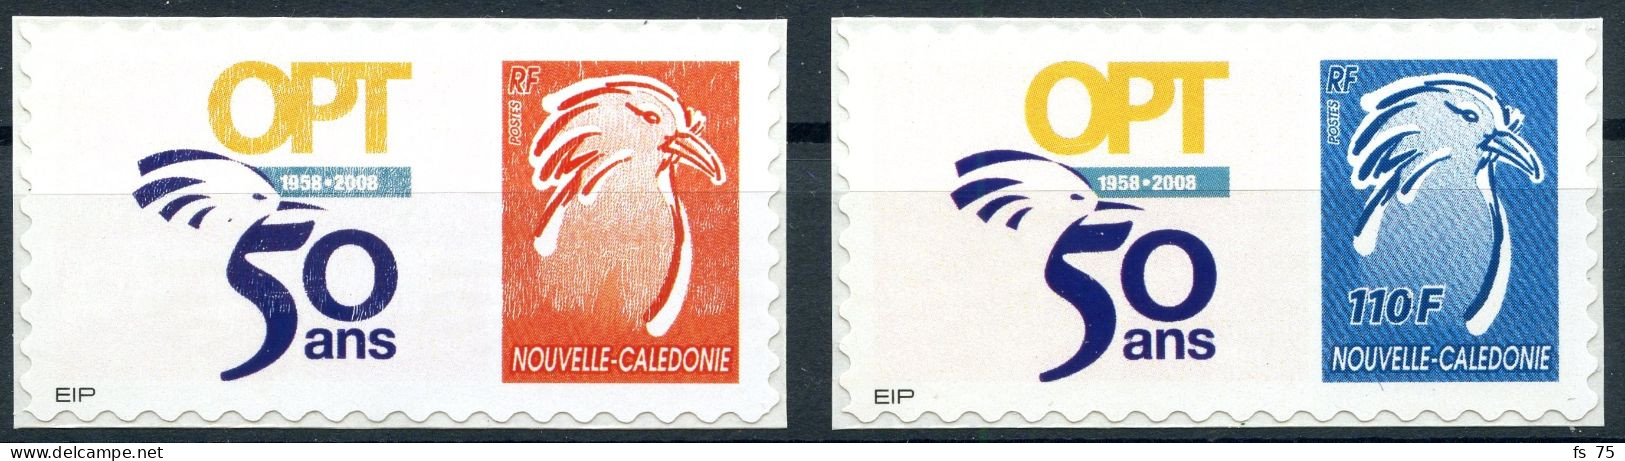 NOUVELLE CALEDONIE N°1051/1052 - TIMBRES PERSONNALISES ADHESIFS - CAGOU - LOGO "OPT" - Neufs